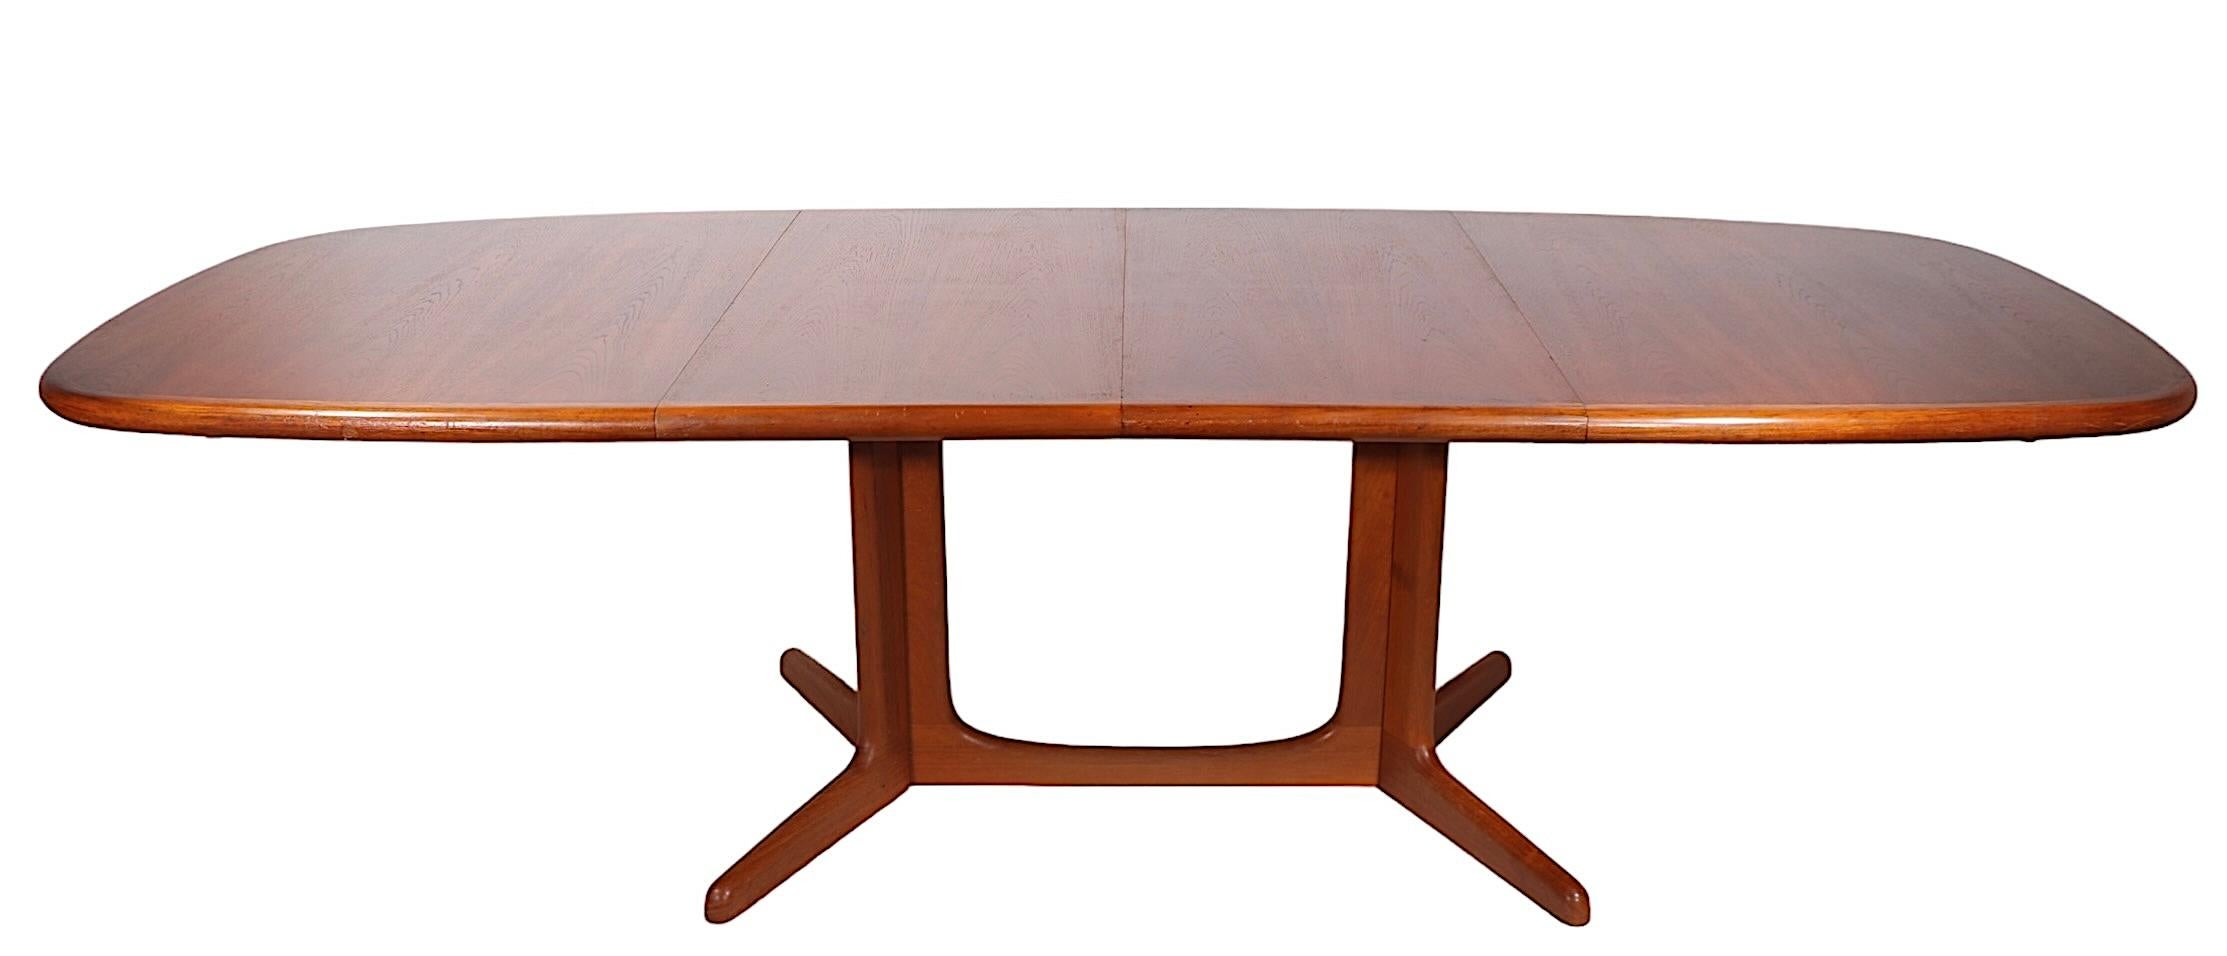 Danish Mid Century Oval Teak Dining Table by Niels Otto Moller for Gudme c 1970s For Sale 9